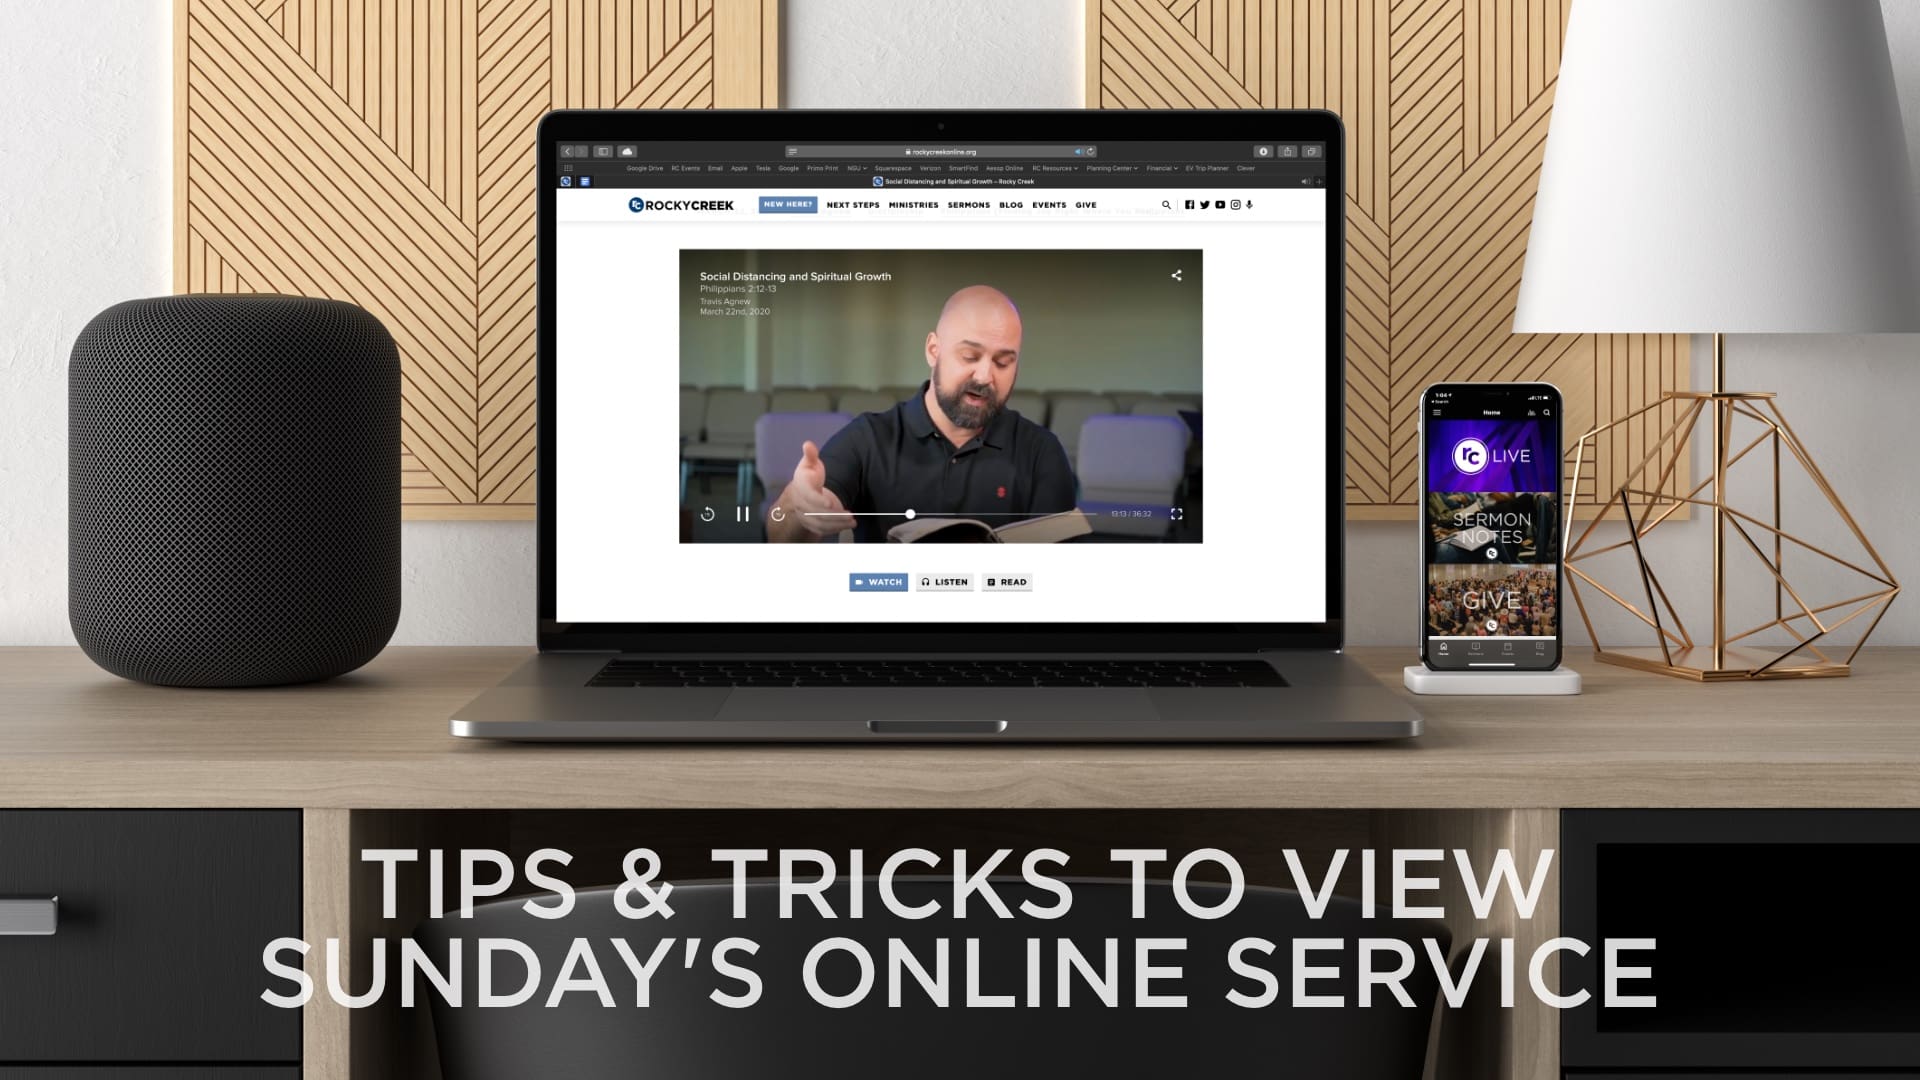 Tips & Tricks to View Sunday’s Online Service